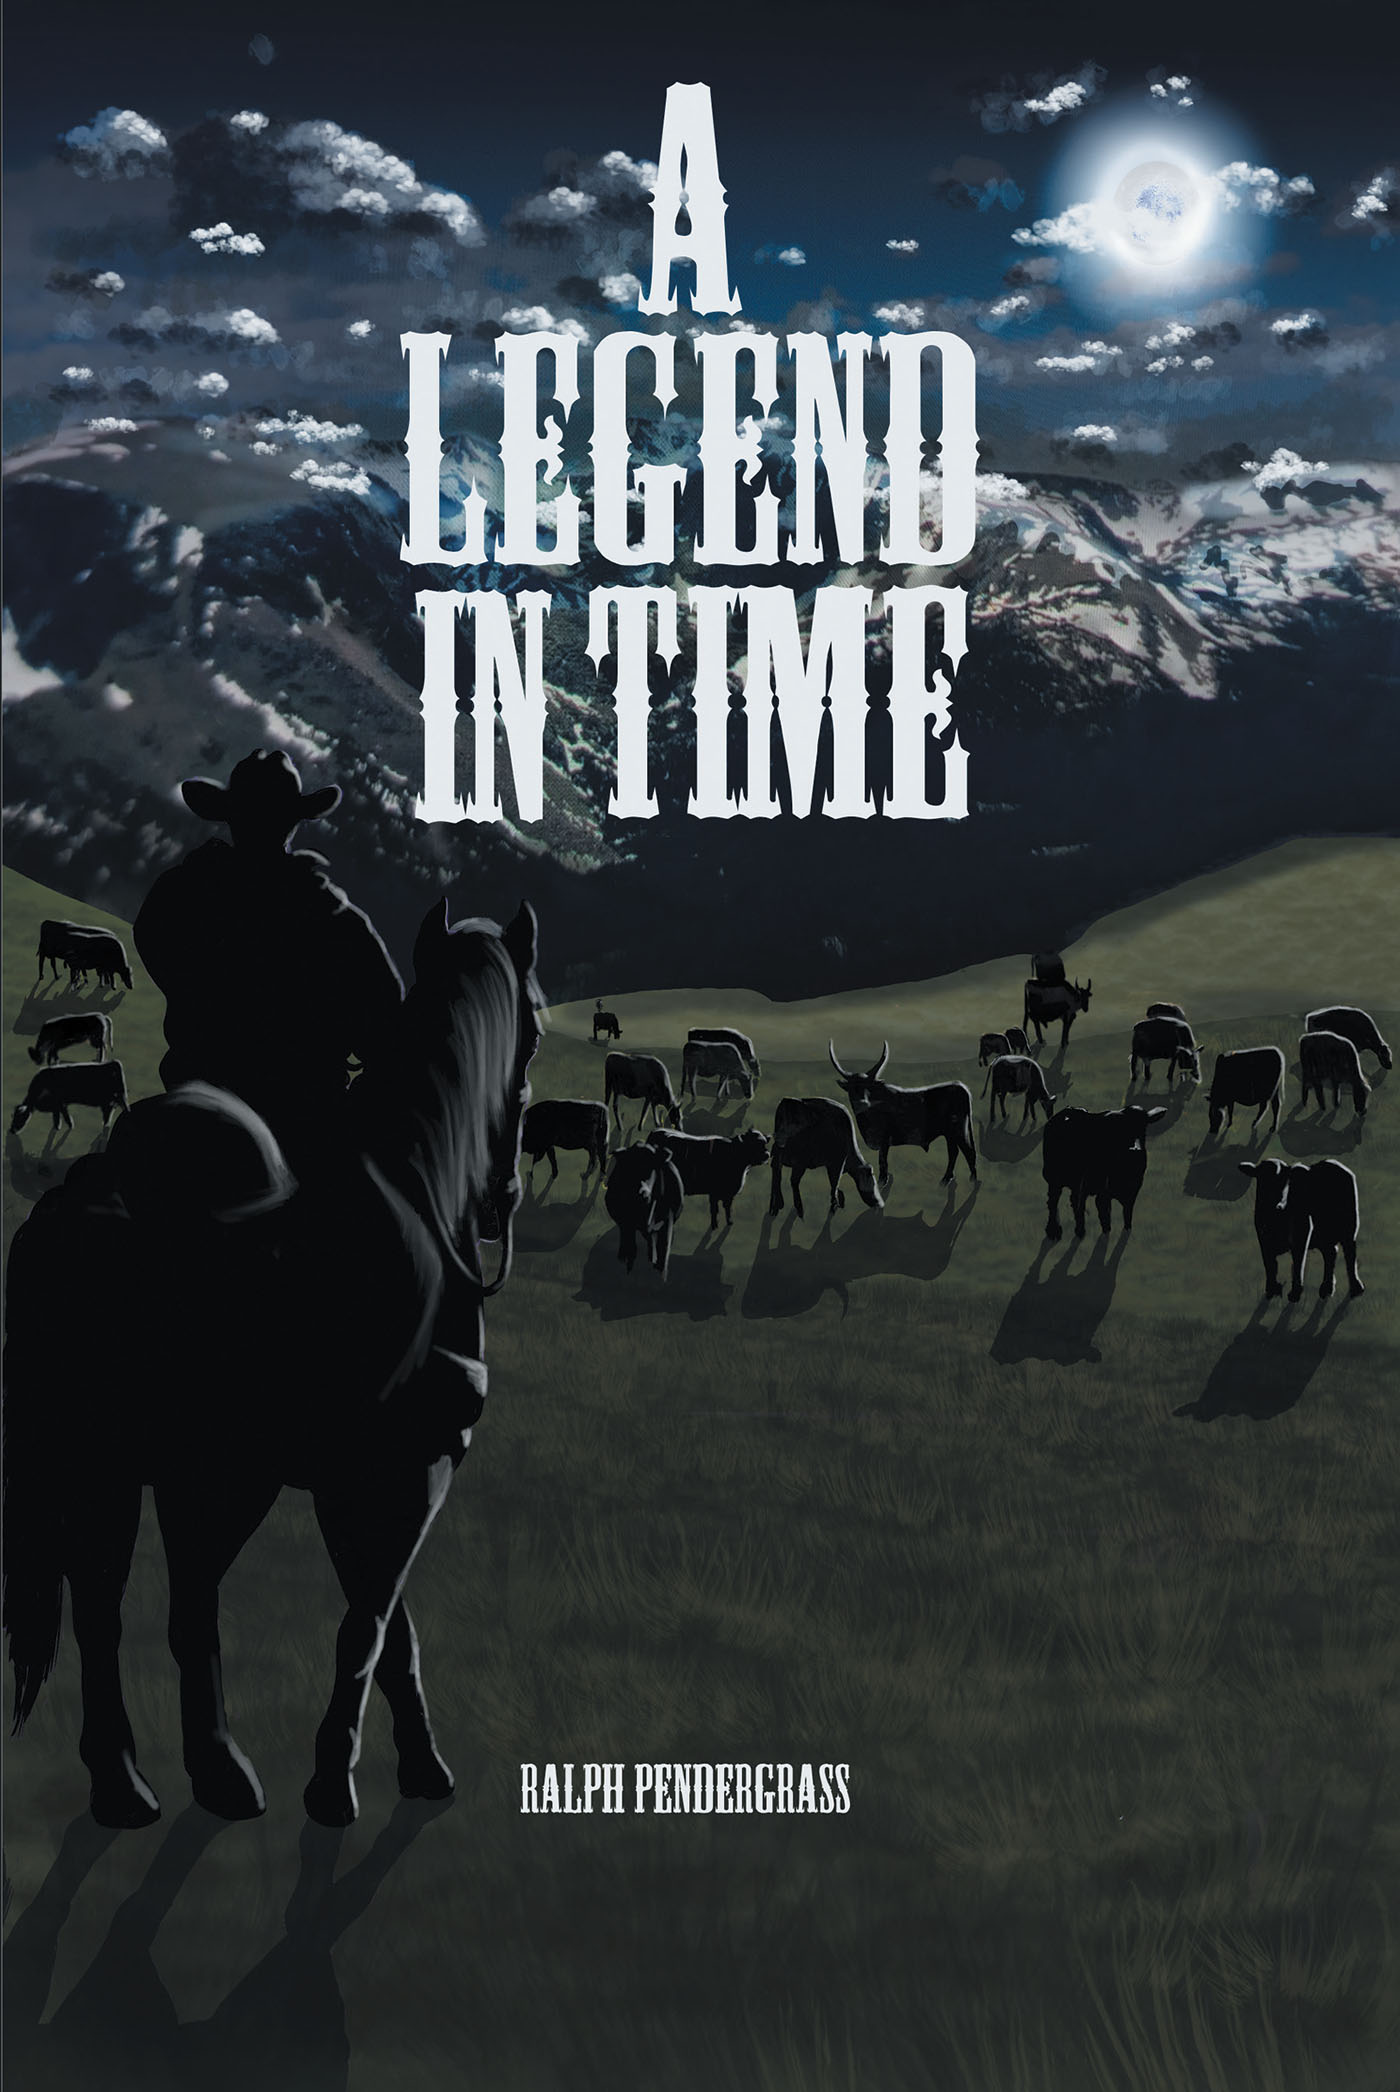 Author Ralph Pendergrass’s New Book "A Legend in Time" is a Captivating Story of One Man's Incredible Adventures Through the Old West, Retold to His Grandson Years Later